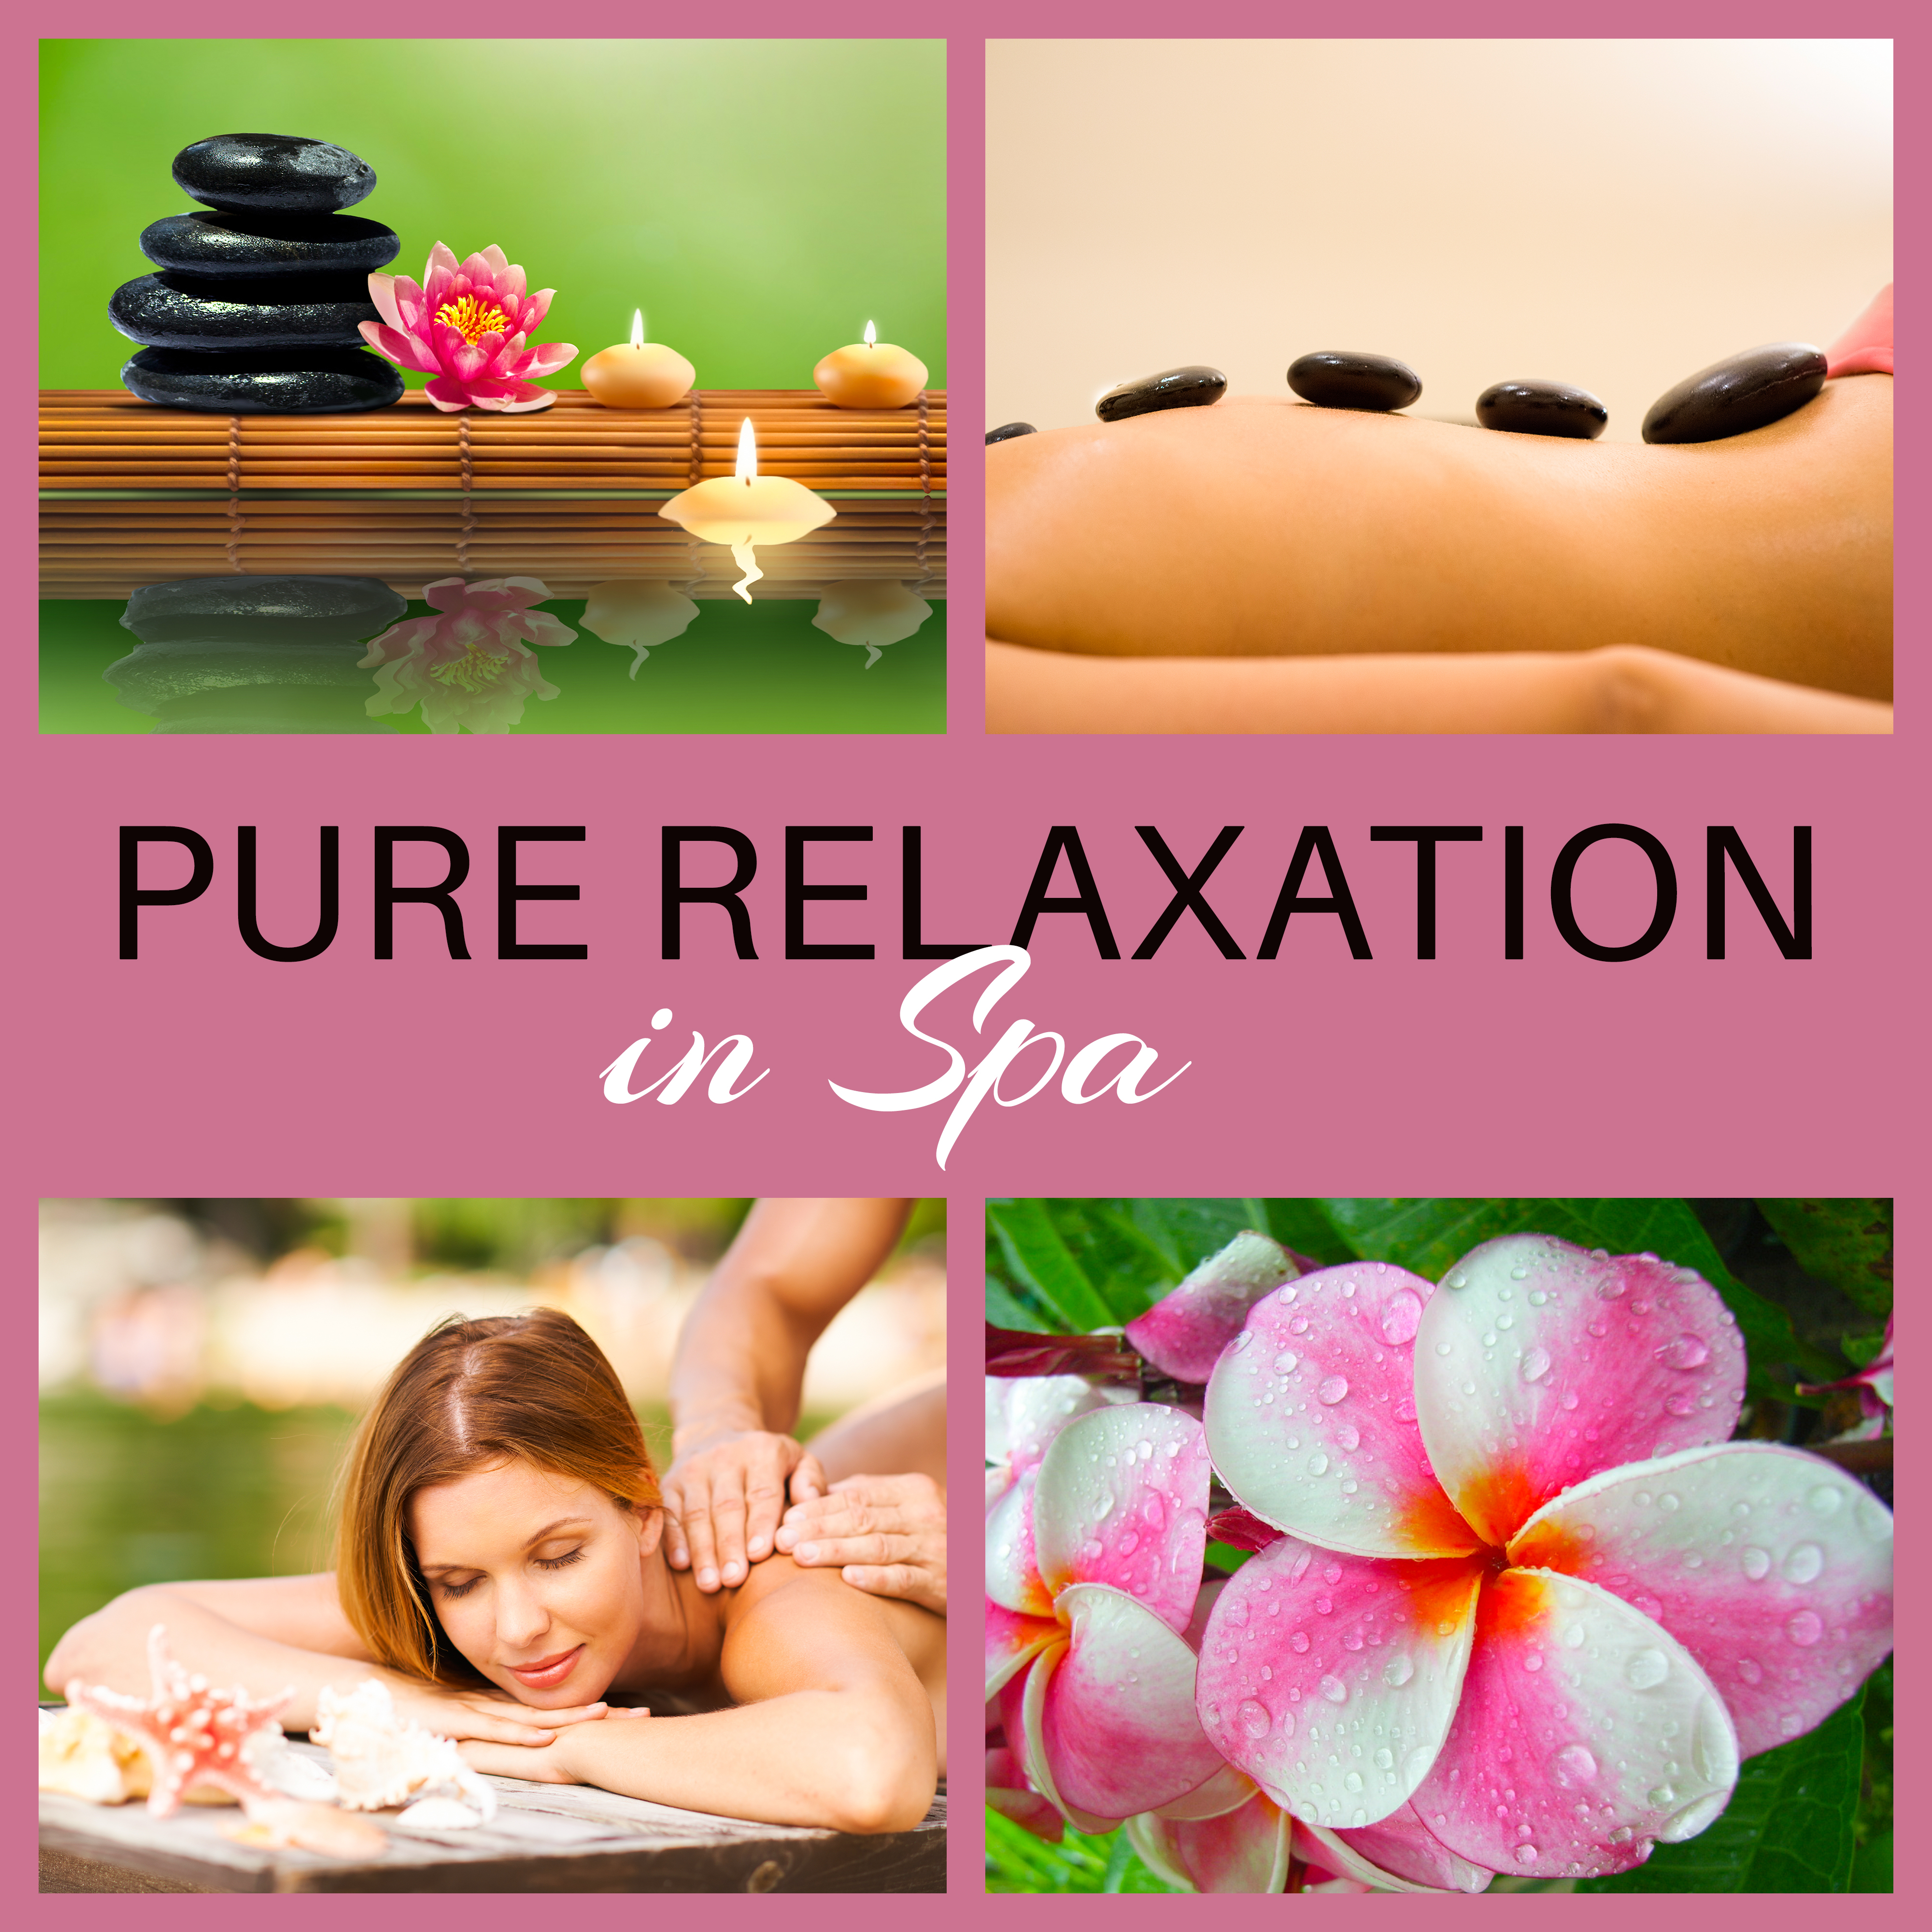 Pure Relaxation in Spa – Massage Music, Wellness, Stress Relief, Healing Music, Soft Nature Sounds to Calm Down, Soothing Spa